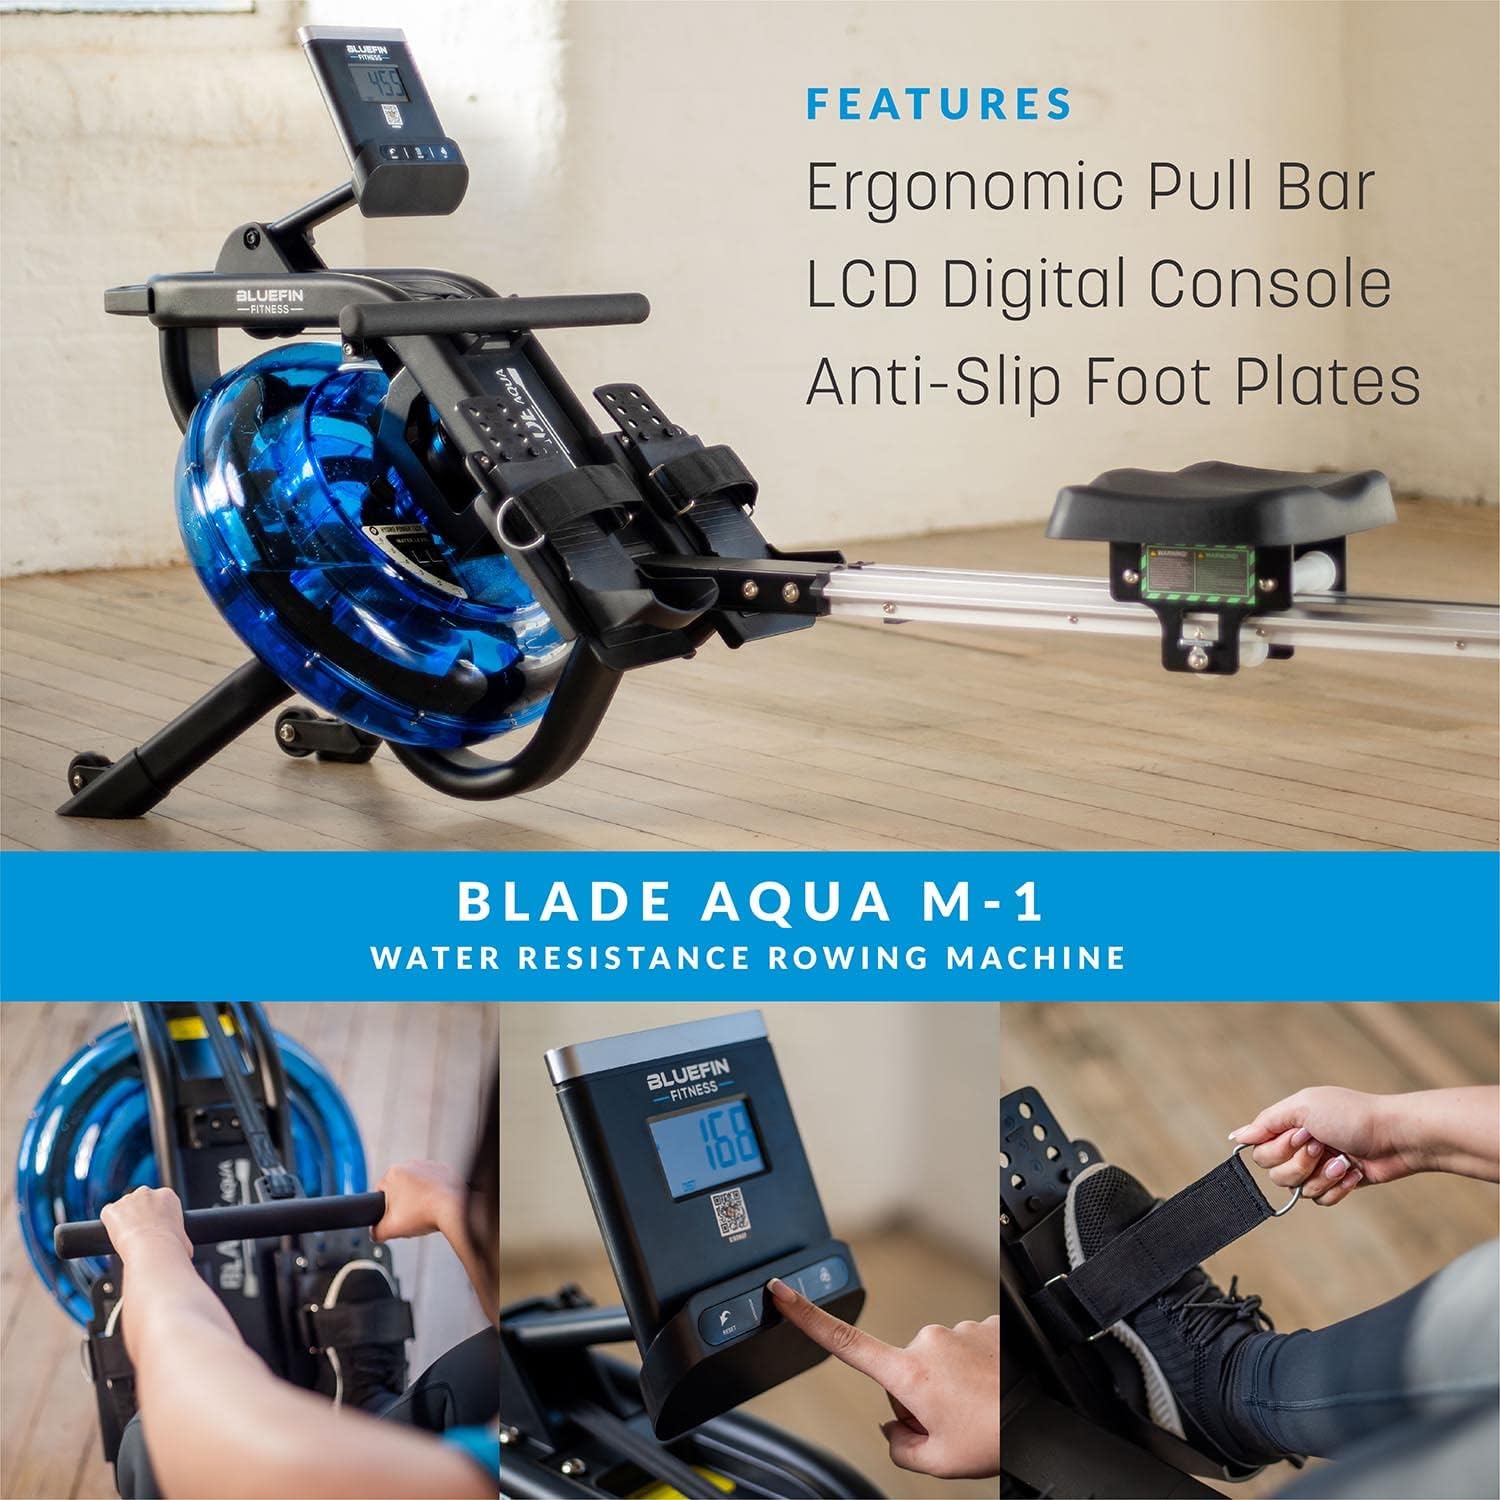 Bluefin Blade Aqua M-1 Water Resistance Rowing Machine - Owners Review